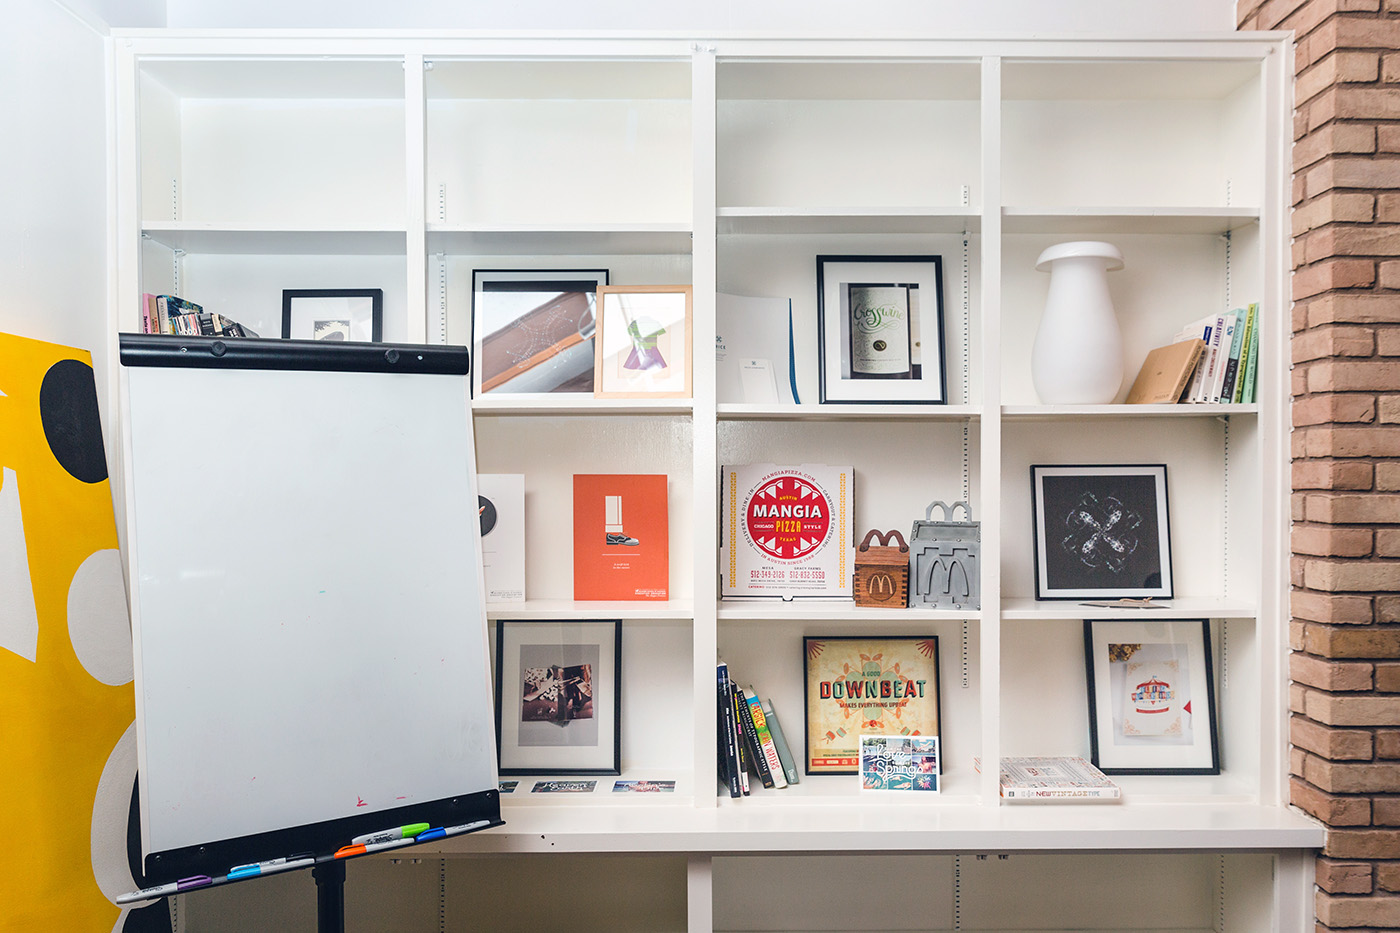 A white wall of shelves with books and picture frames in an office